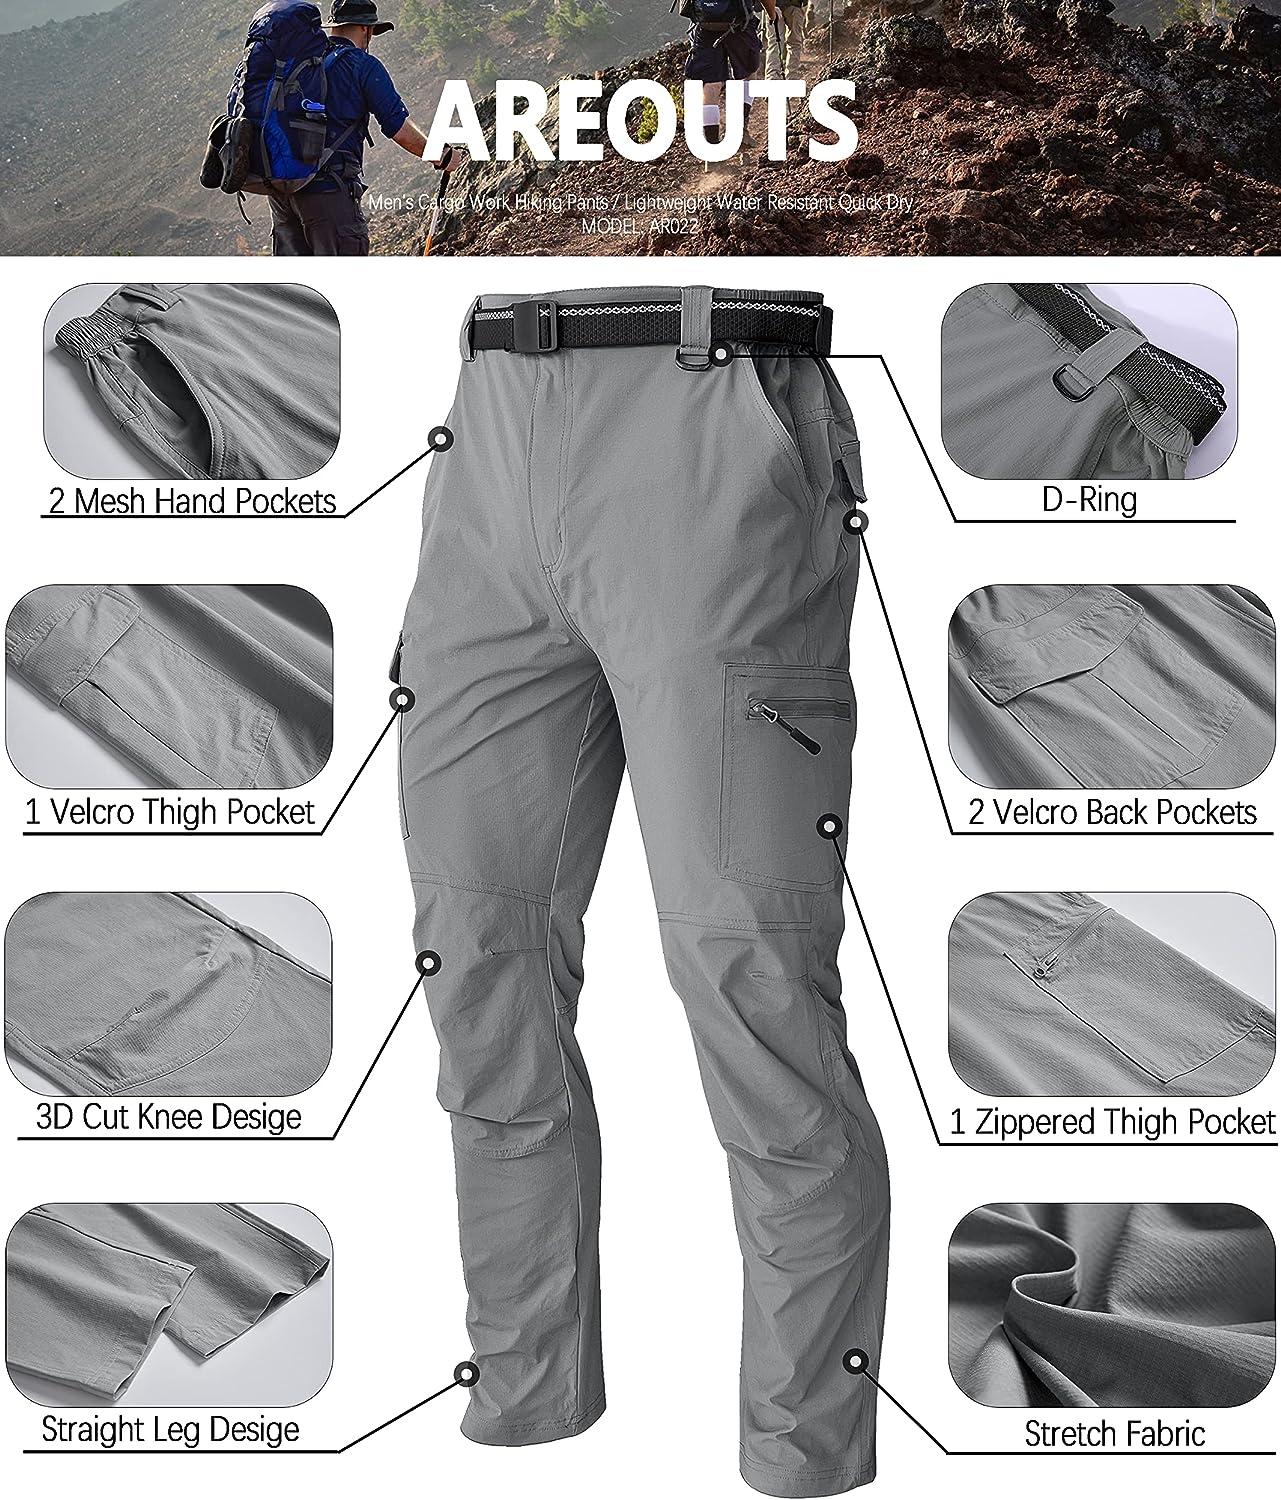 Men's Cargo Work Hiking Pants Lightweight Water Resistant Quick Dry Fishing  Travel Camping Outdoor Breathable Multi Pockets Light Grey Medium